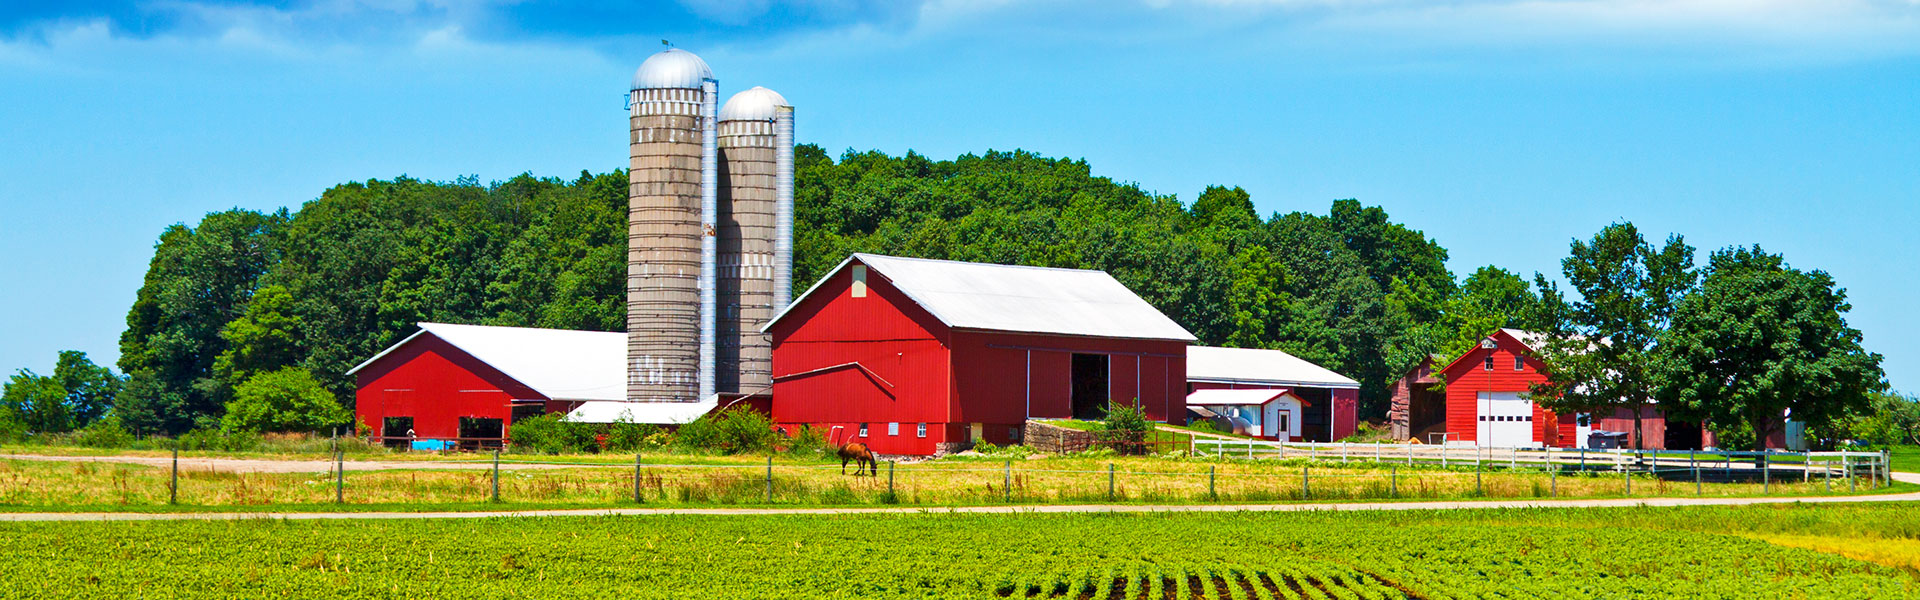 Barn on Field with Farm Insurance in Toledo, Perrysburg, Grand Rapids, OH, Maumee, Haskins, Otsego